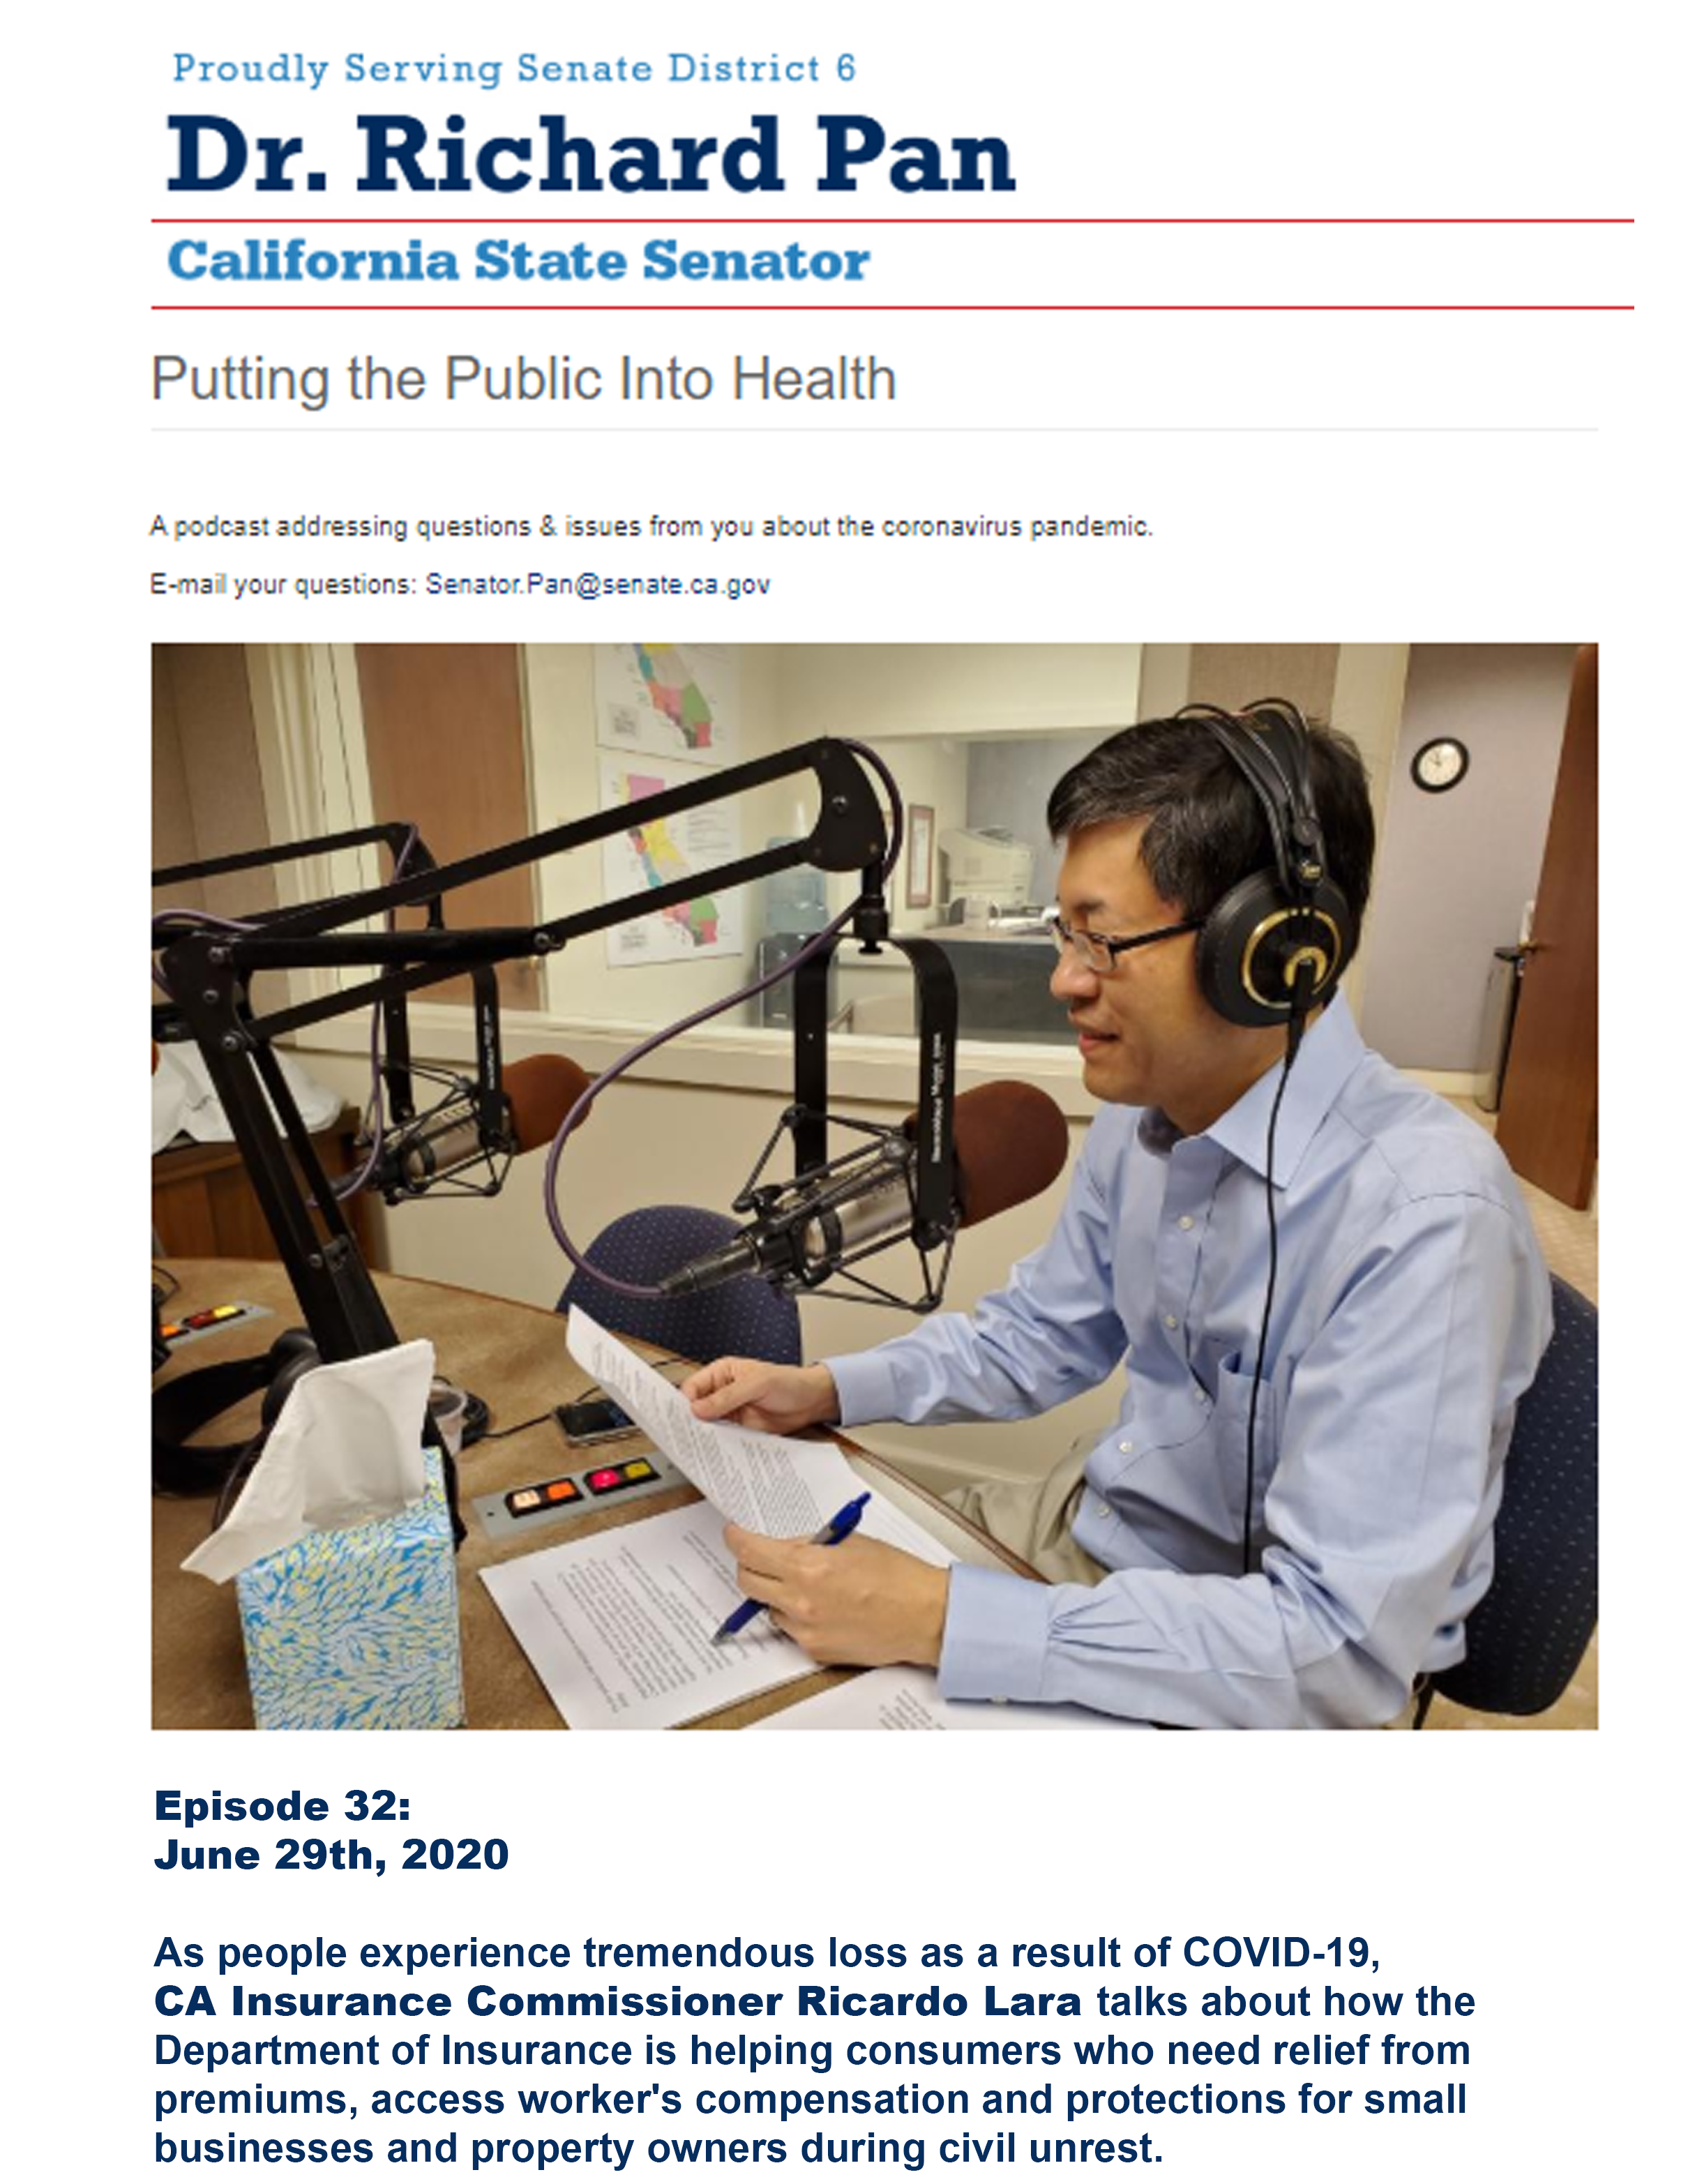 Dr. Richard Pan, California State Senator serving senate district 6. Putting the Public Into Health, Episode 32: June 29th, 2020  As people experience tremendous loss as a result of COVID-19, CA Insurance Commissioner Ricardo Lara talks about